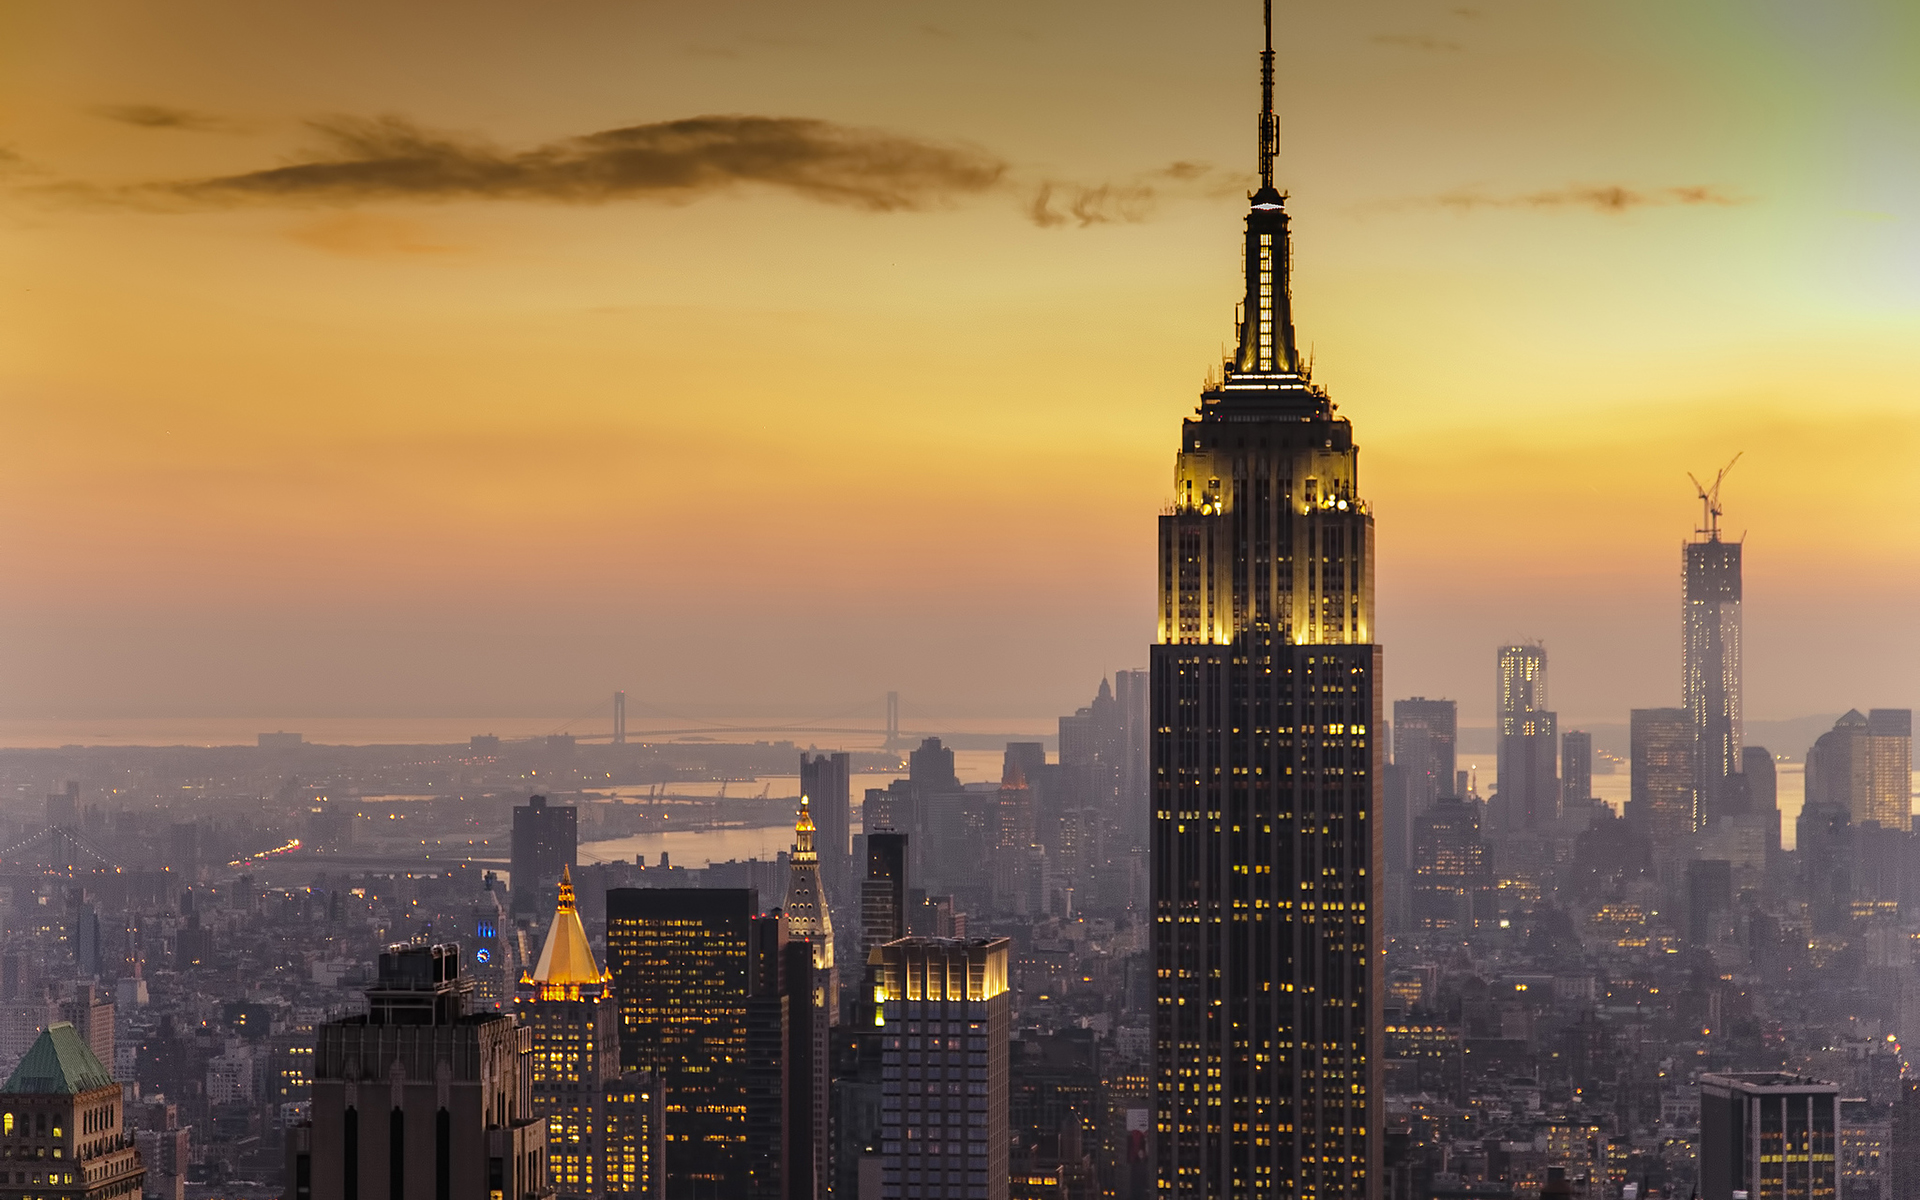 The Empire State Building and NYC skyline at sunset